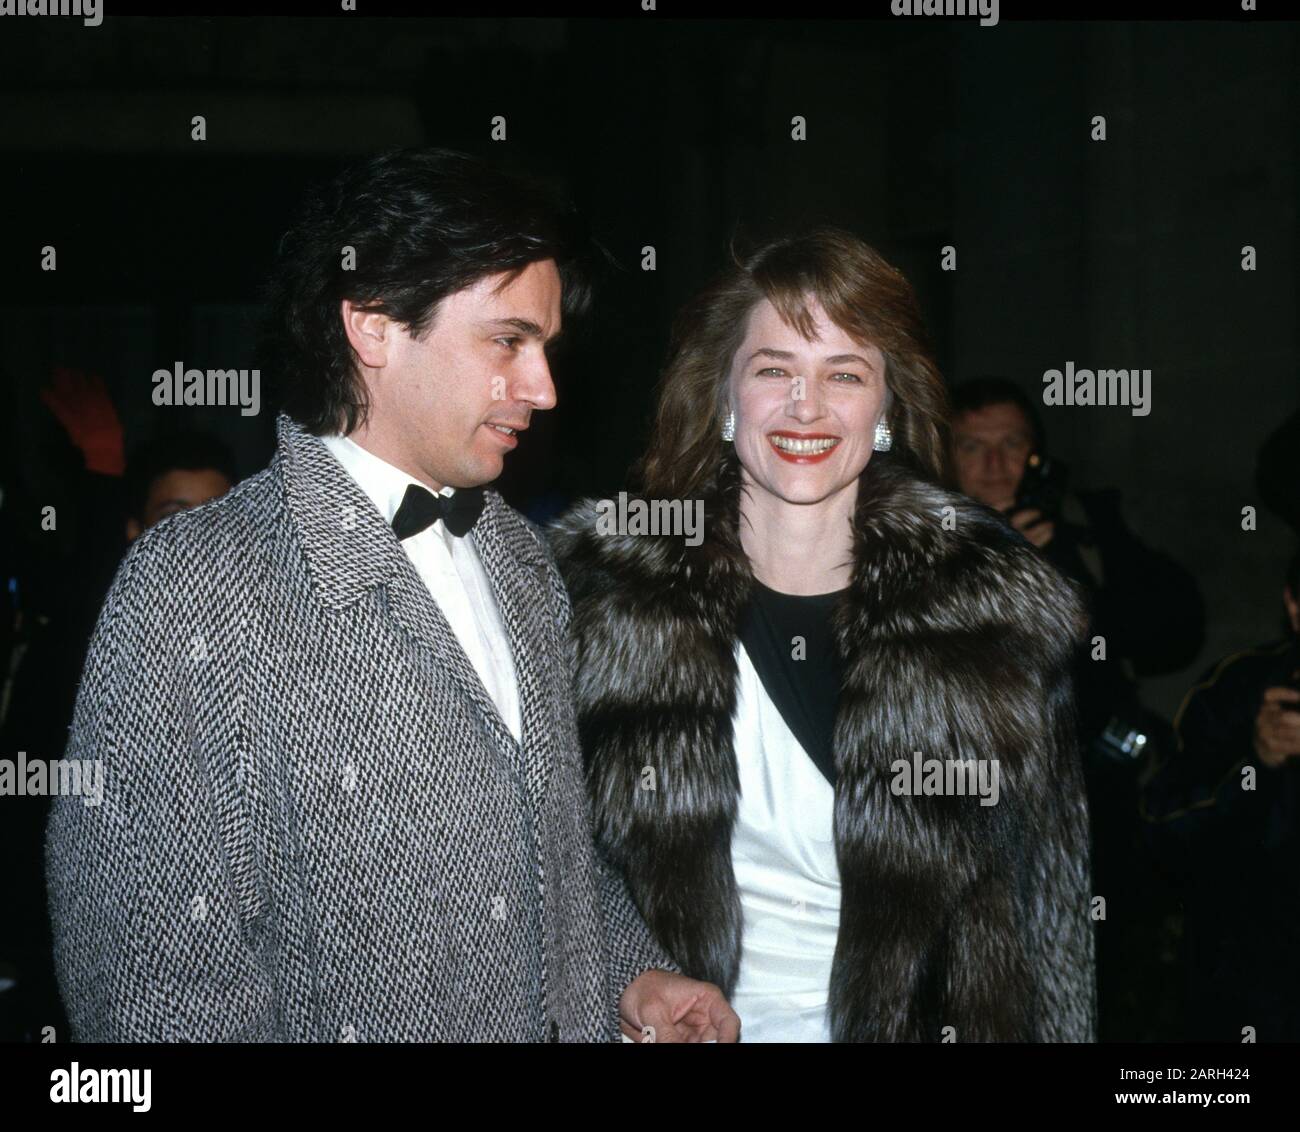 Musician Jean-Michel Jarre with his second wife actress Charlotte Rampling, London, England 1984. The couple were divorced in 1998. Stock Photo